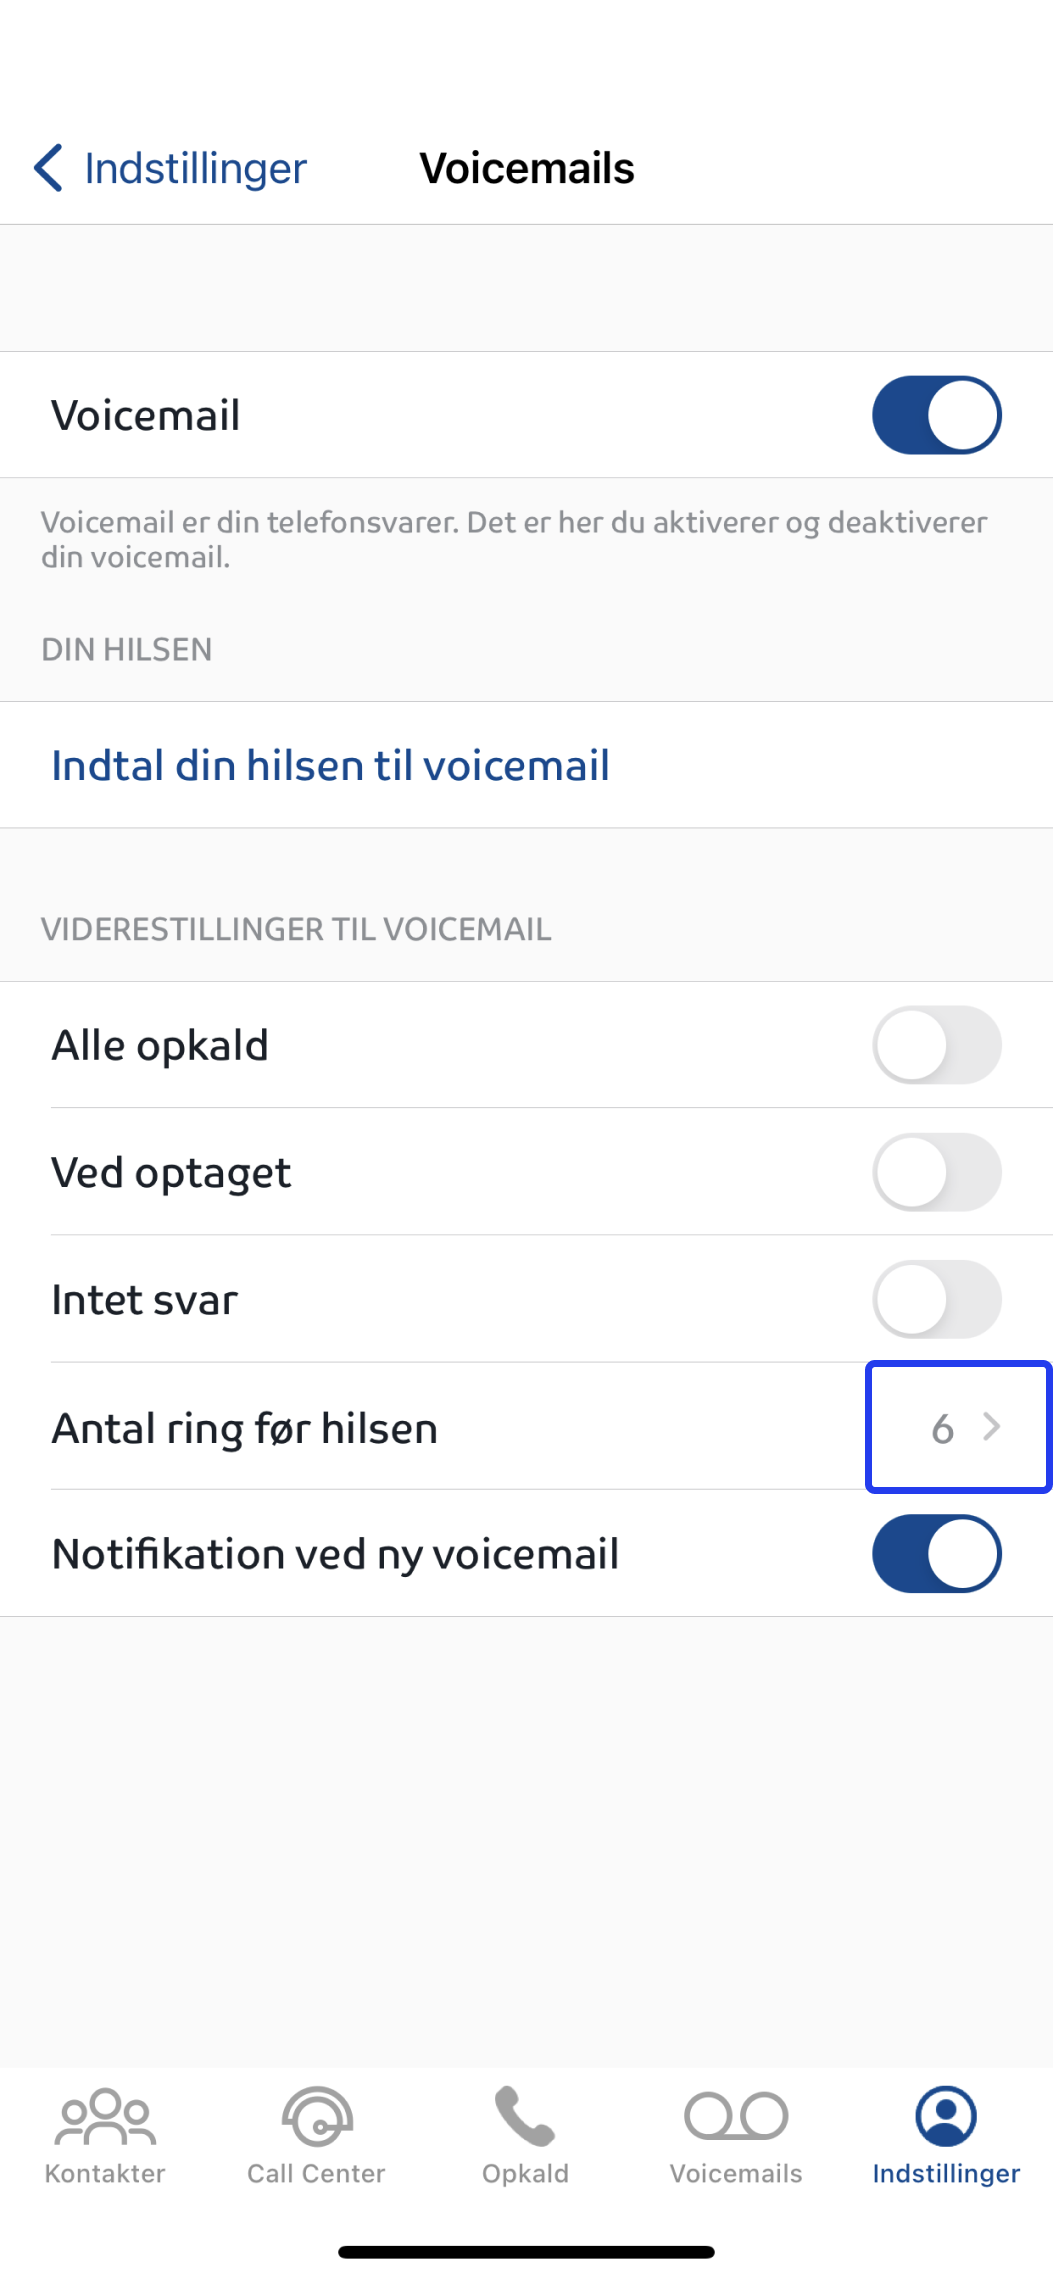 Antal ring inden voicemail i Assist app